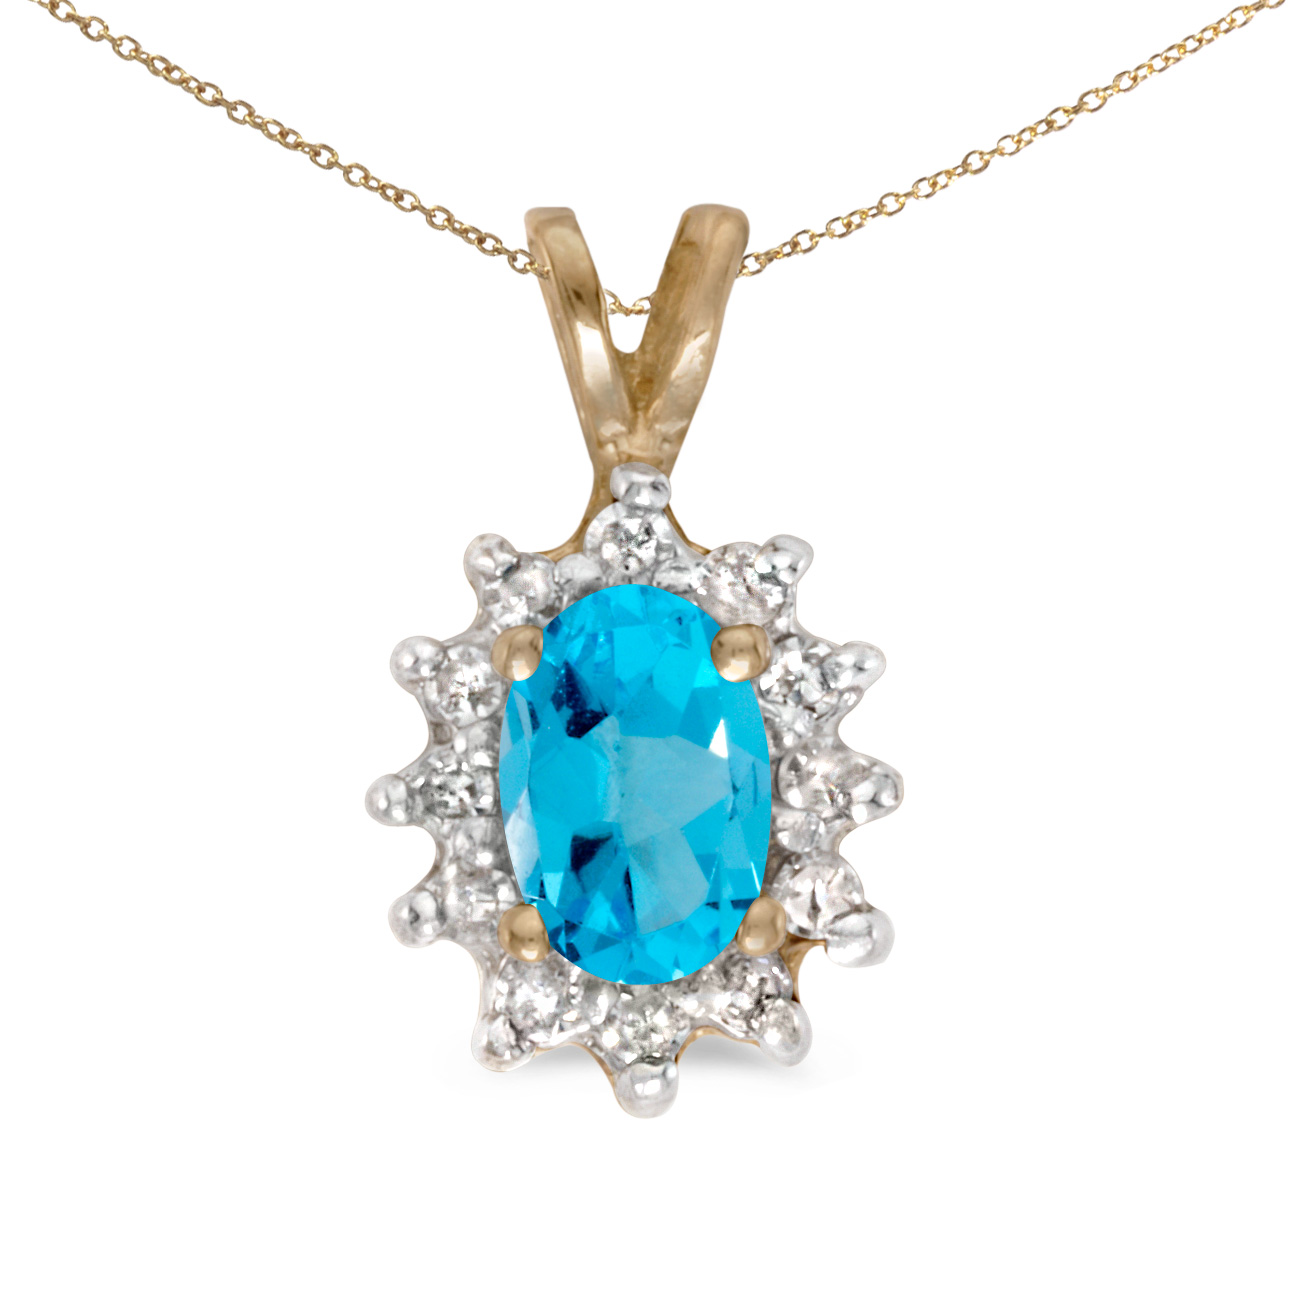 This 14k yellow gold oval blue topaz and diamond pendant features a 6x4 mm genuine natural blue topaz with a 0.40 ct total weight.